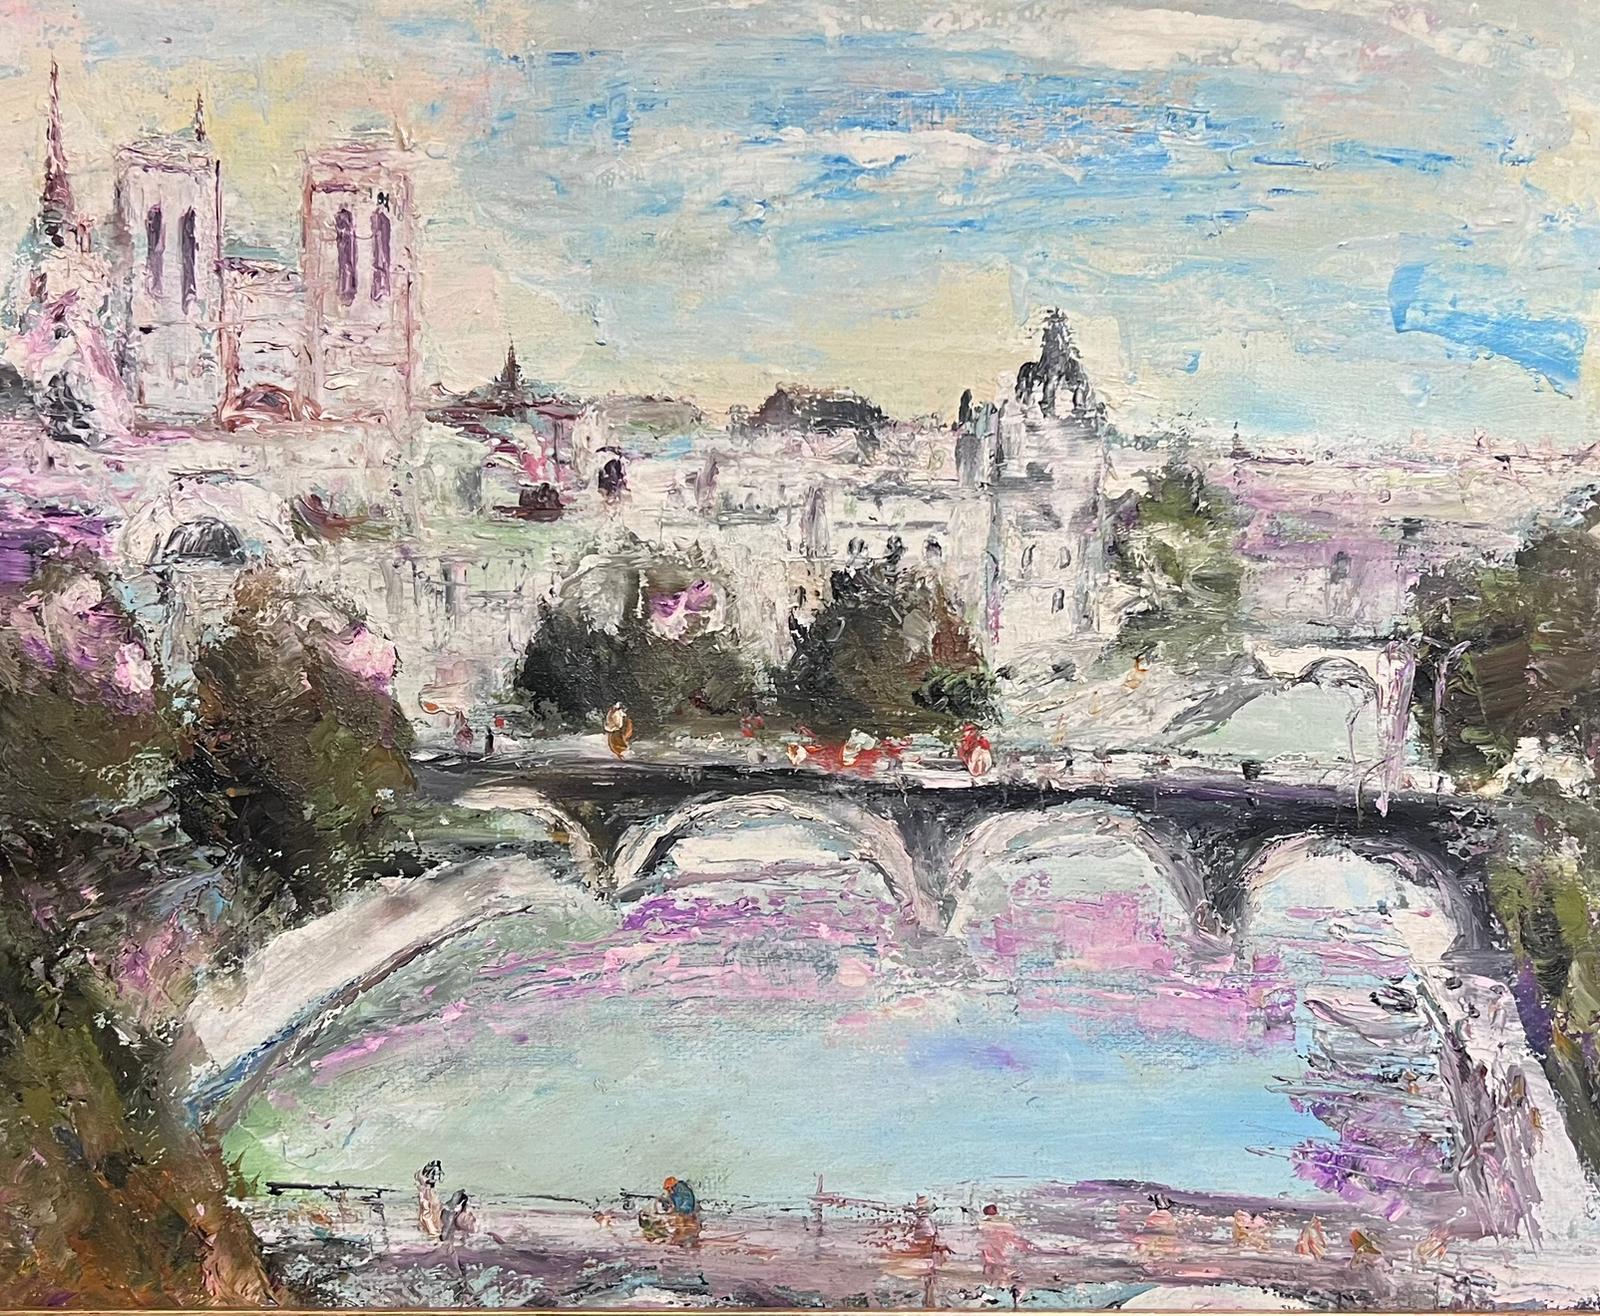 The Bridges over the River Seine
French Expressionist artist, 20th century
indistinctly signed/ titled verso
oil on board, framed
framed: 22 x 26 inches
board: 16 x 20 inches
provenance: private collection, France
condition: very good and sound